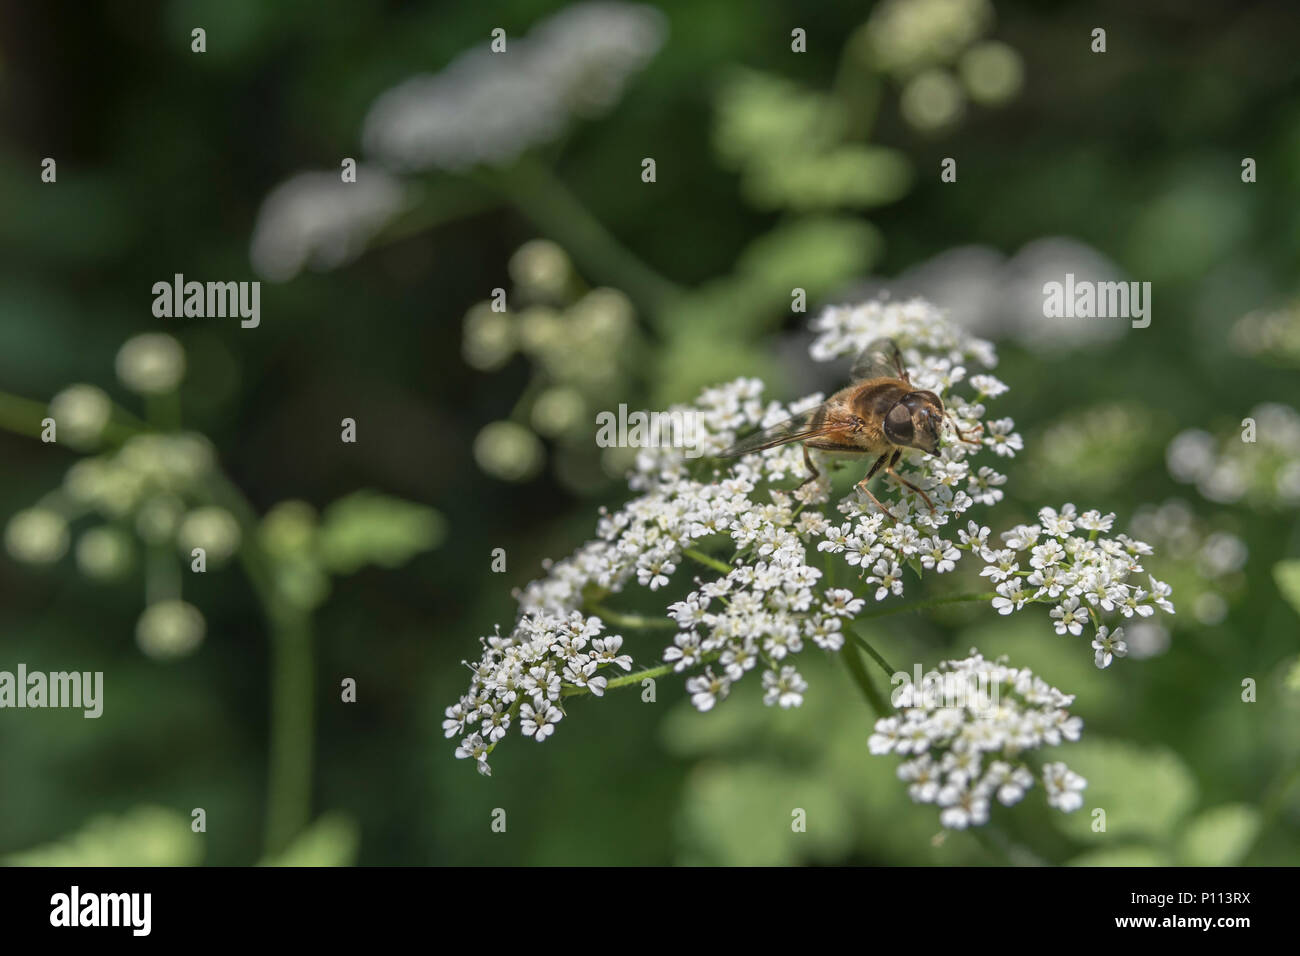 Hogweed + Winged insect / fly (may be Drone Fly / Eristalis tenax) on the white flowers of an umbelliferous plant, possibly hogweed. Fly close up. Stock Photo